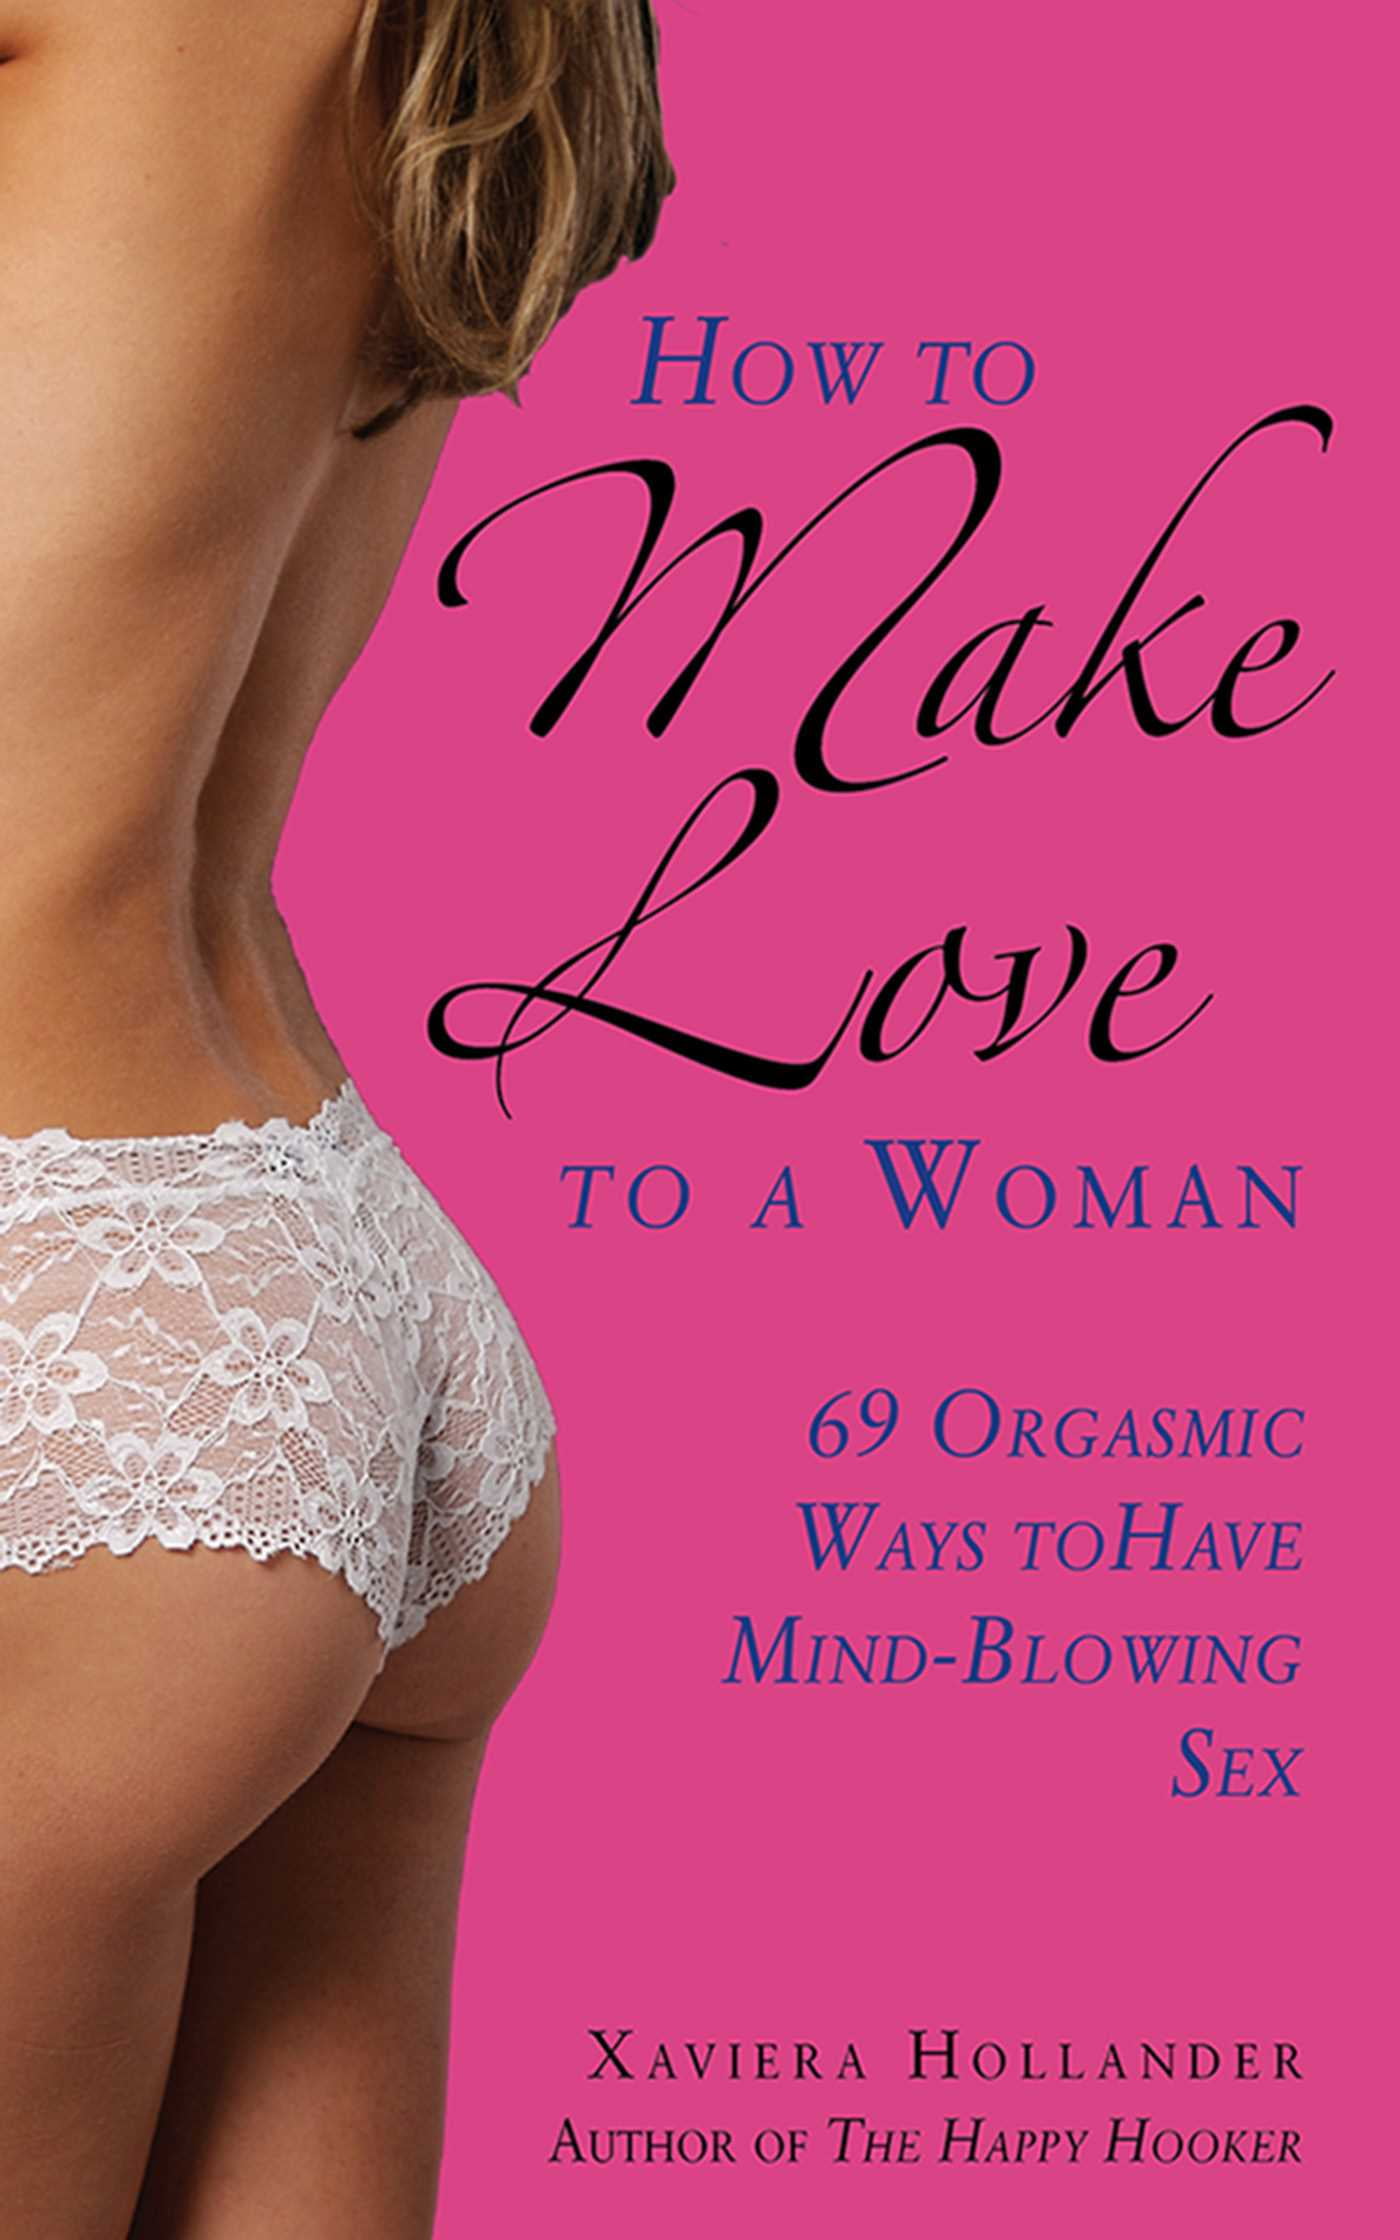 How to Make Love to a Woman 69 Orgasmic Ways to Have Mind-Blowing Sex (Paperback)